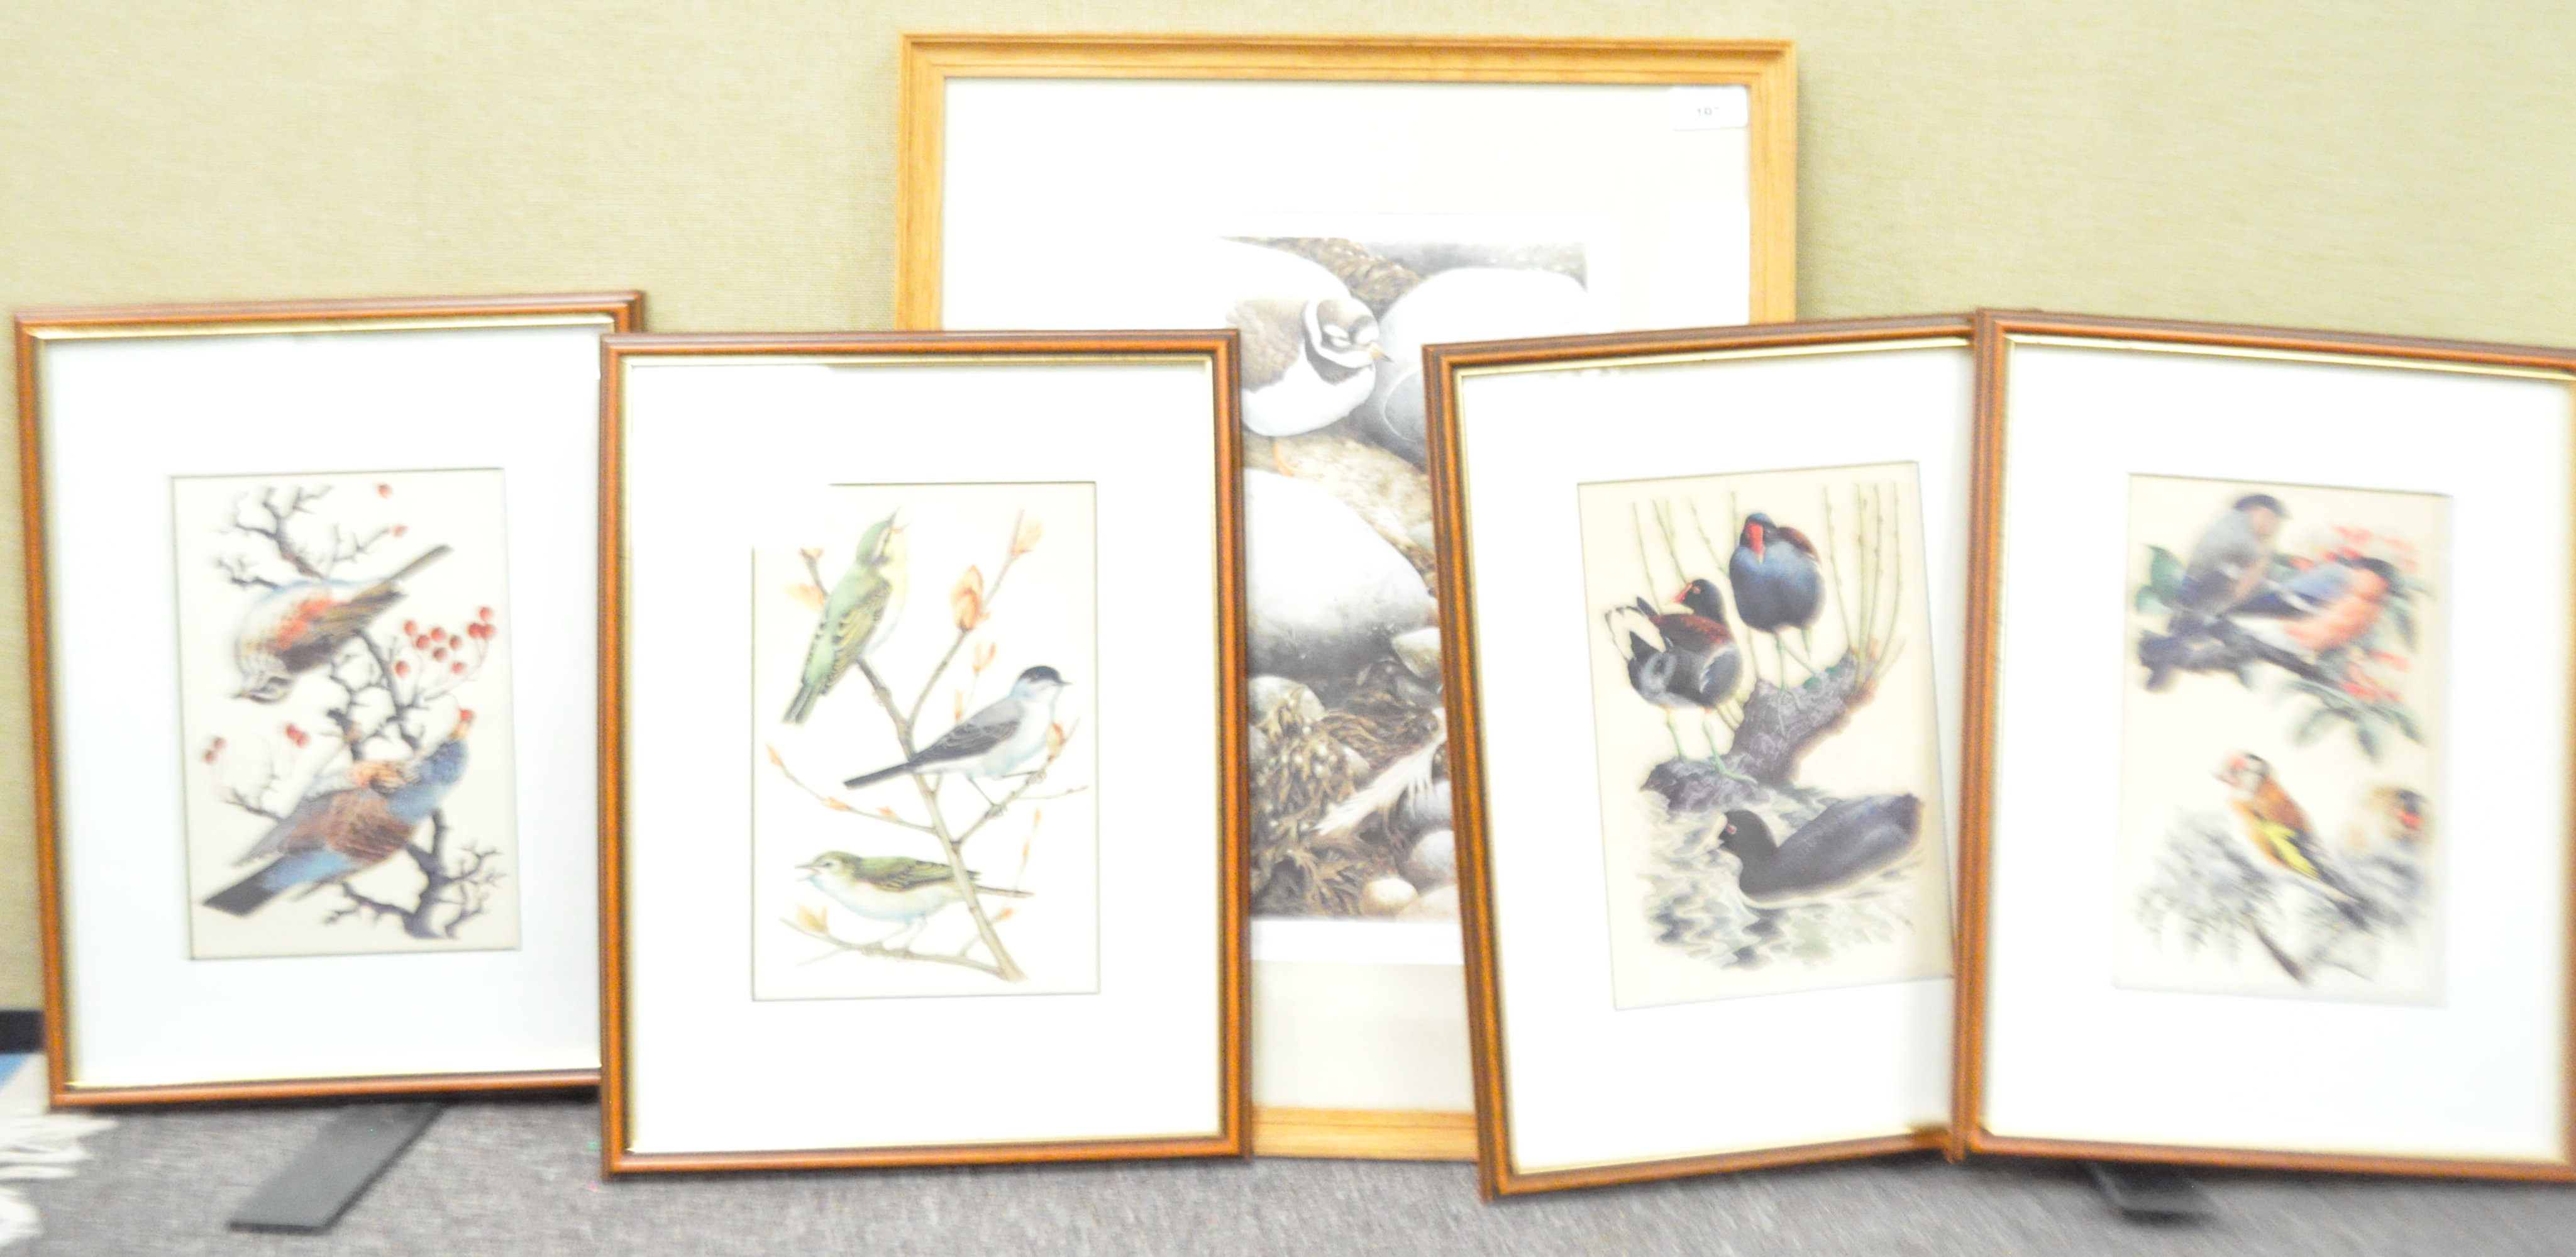 A set of four prints of birds and one other